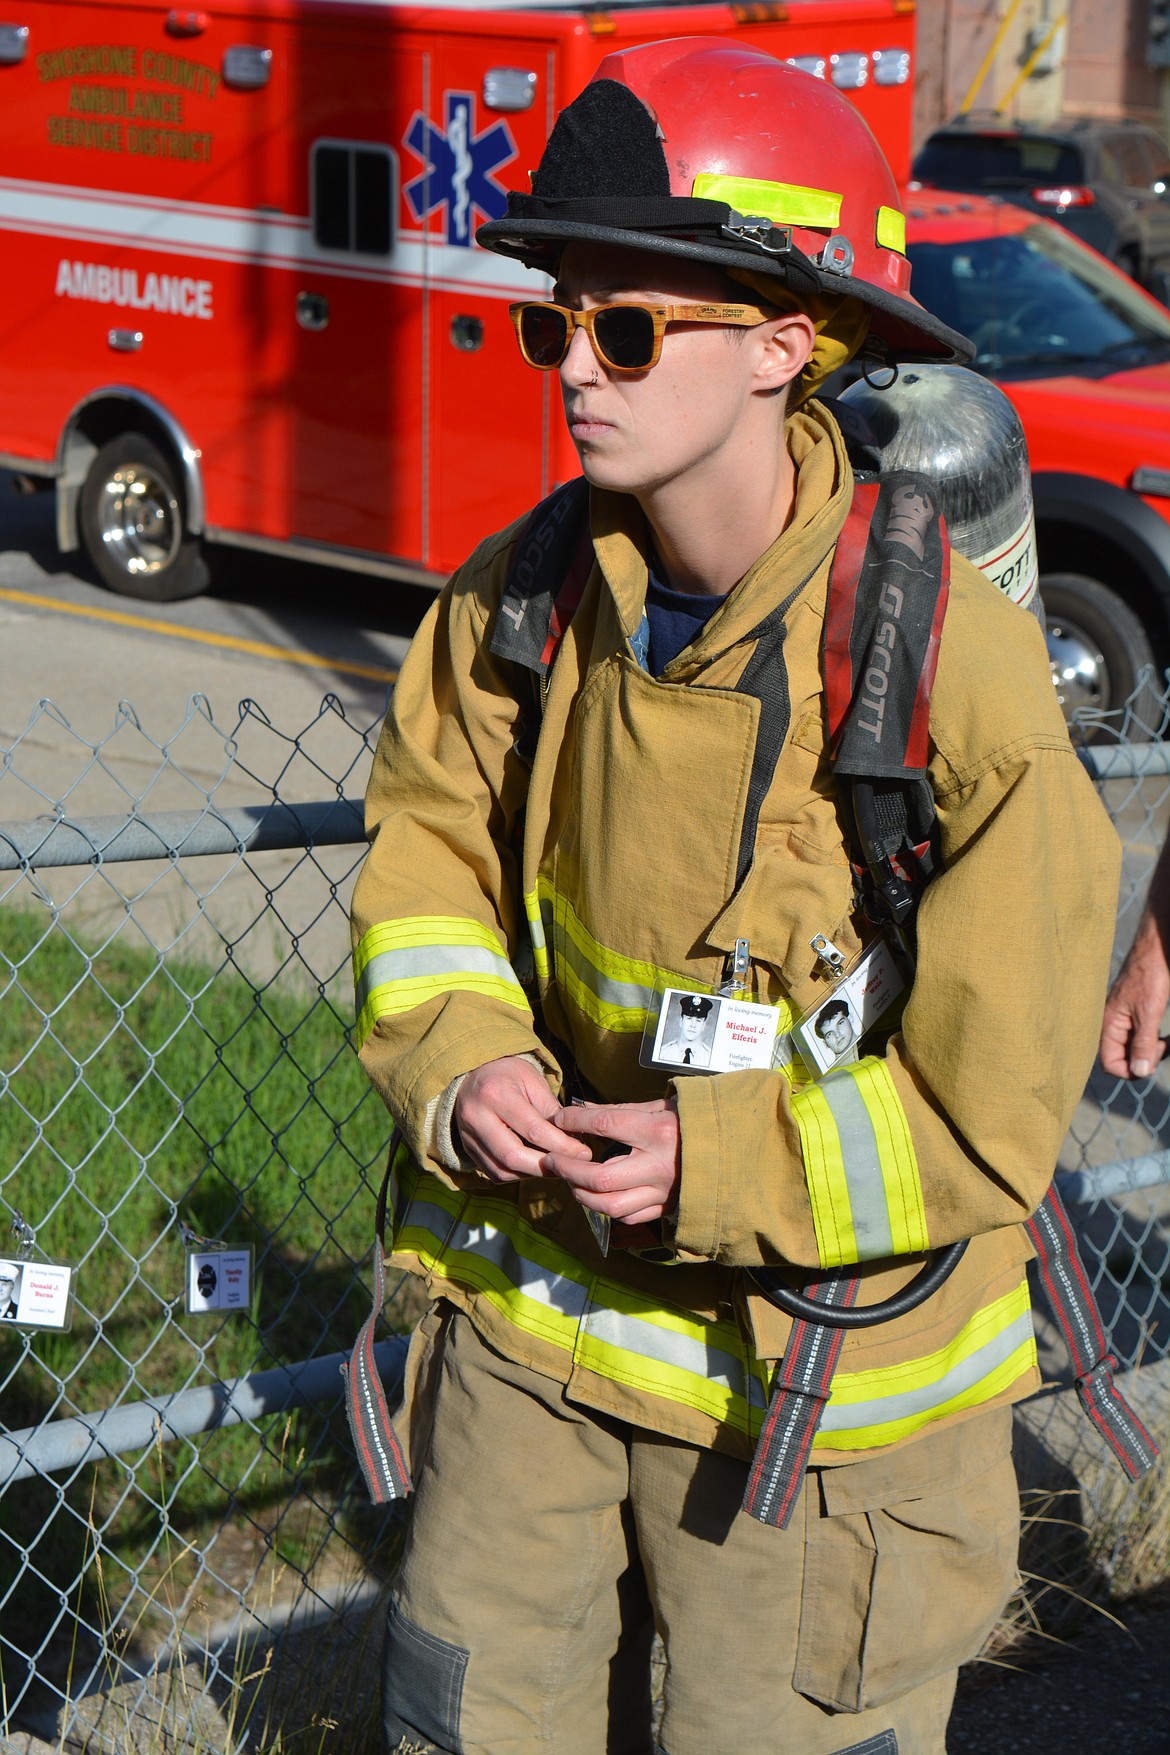 Marah Ashcraft prepared to make the 12 laps up and around flights of stairs to honor fallen firefighters. Ashcraft volunteers with Shoshone Fire District One.